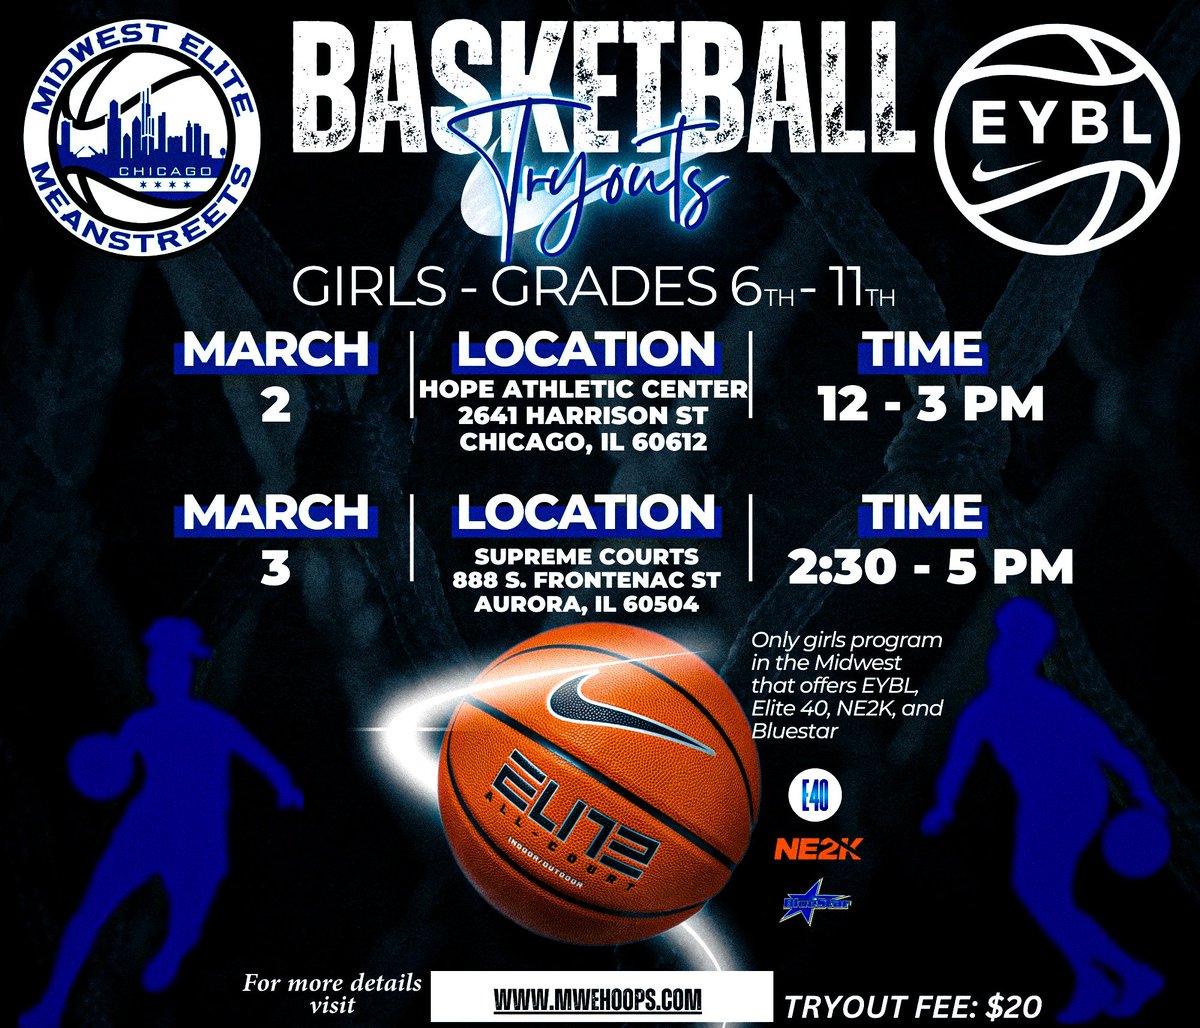 🏀 Midwest Elite Meanstreets EYBL Girls' Basketball Tryouts 🏀 Join the Elite! Midwest Elite Meanstreets EYBL, the only EYBL girls' program in Chicagoland, invites you to our upcoming basketball tryouts. If you're looking to elevate your game and join an elite circuit with